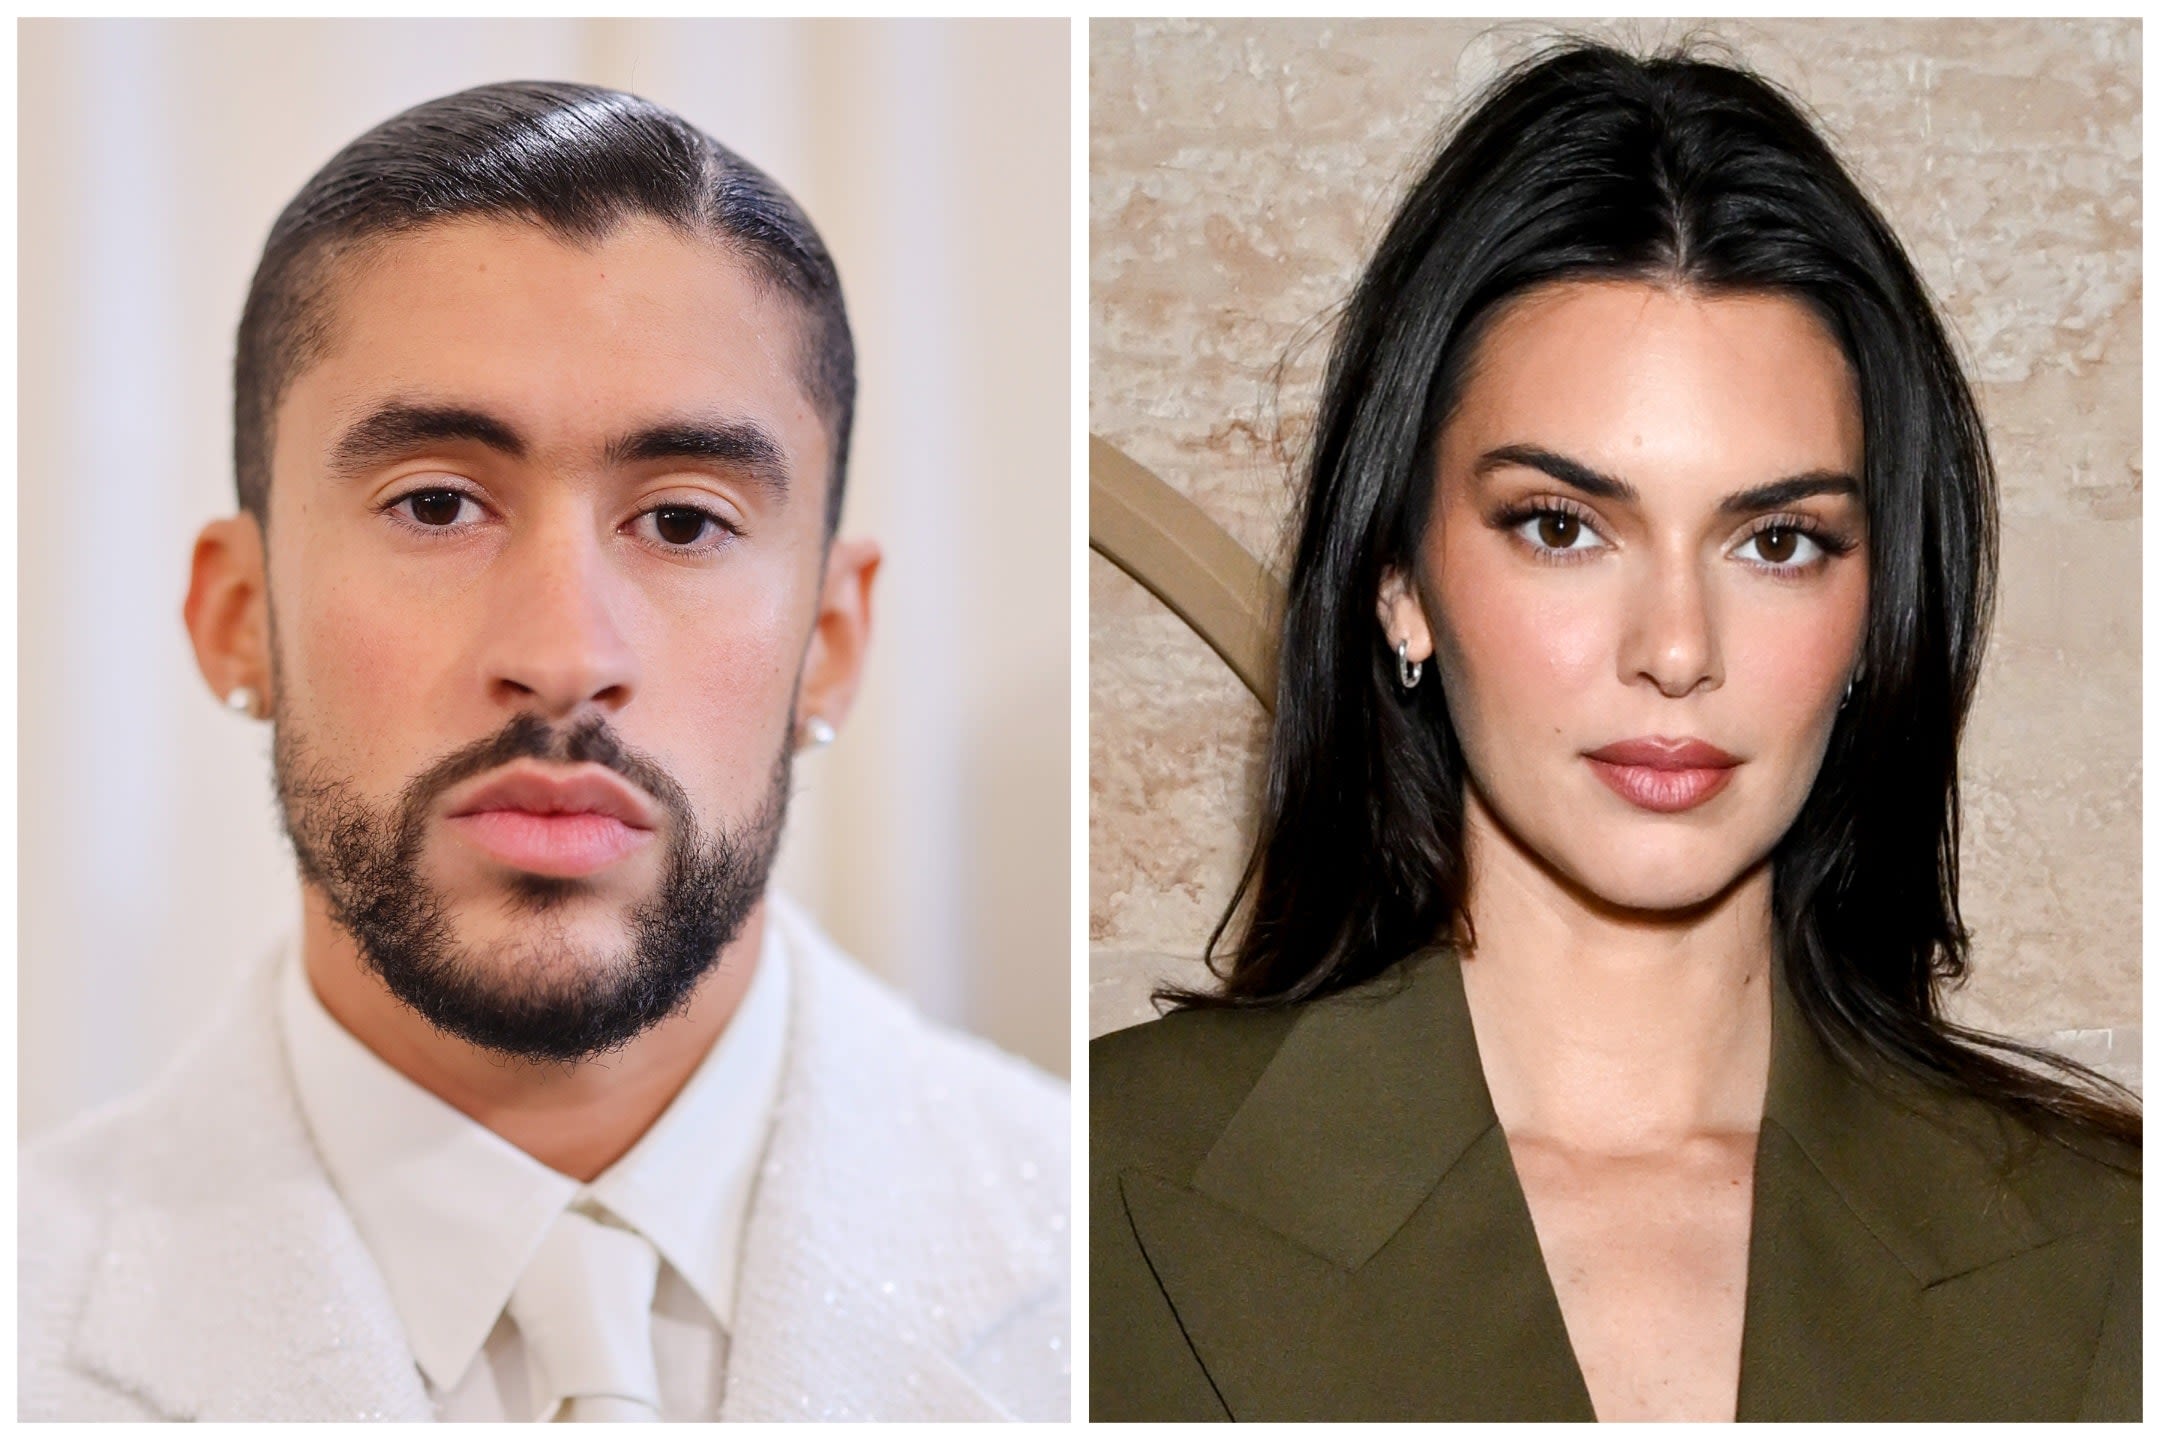 Kendall Jenner and Bad Bunny Can’t Stop Feeding the ‘Back Together’ Rumors